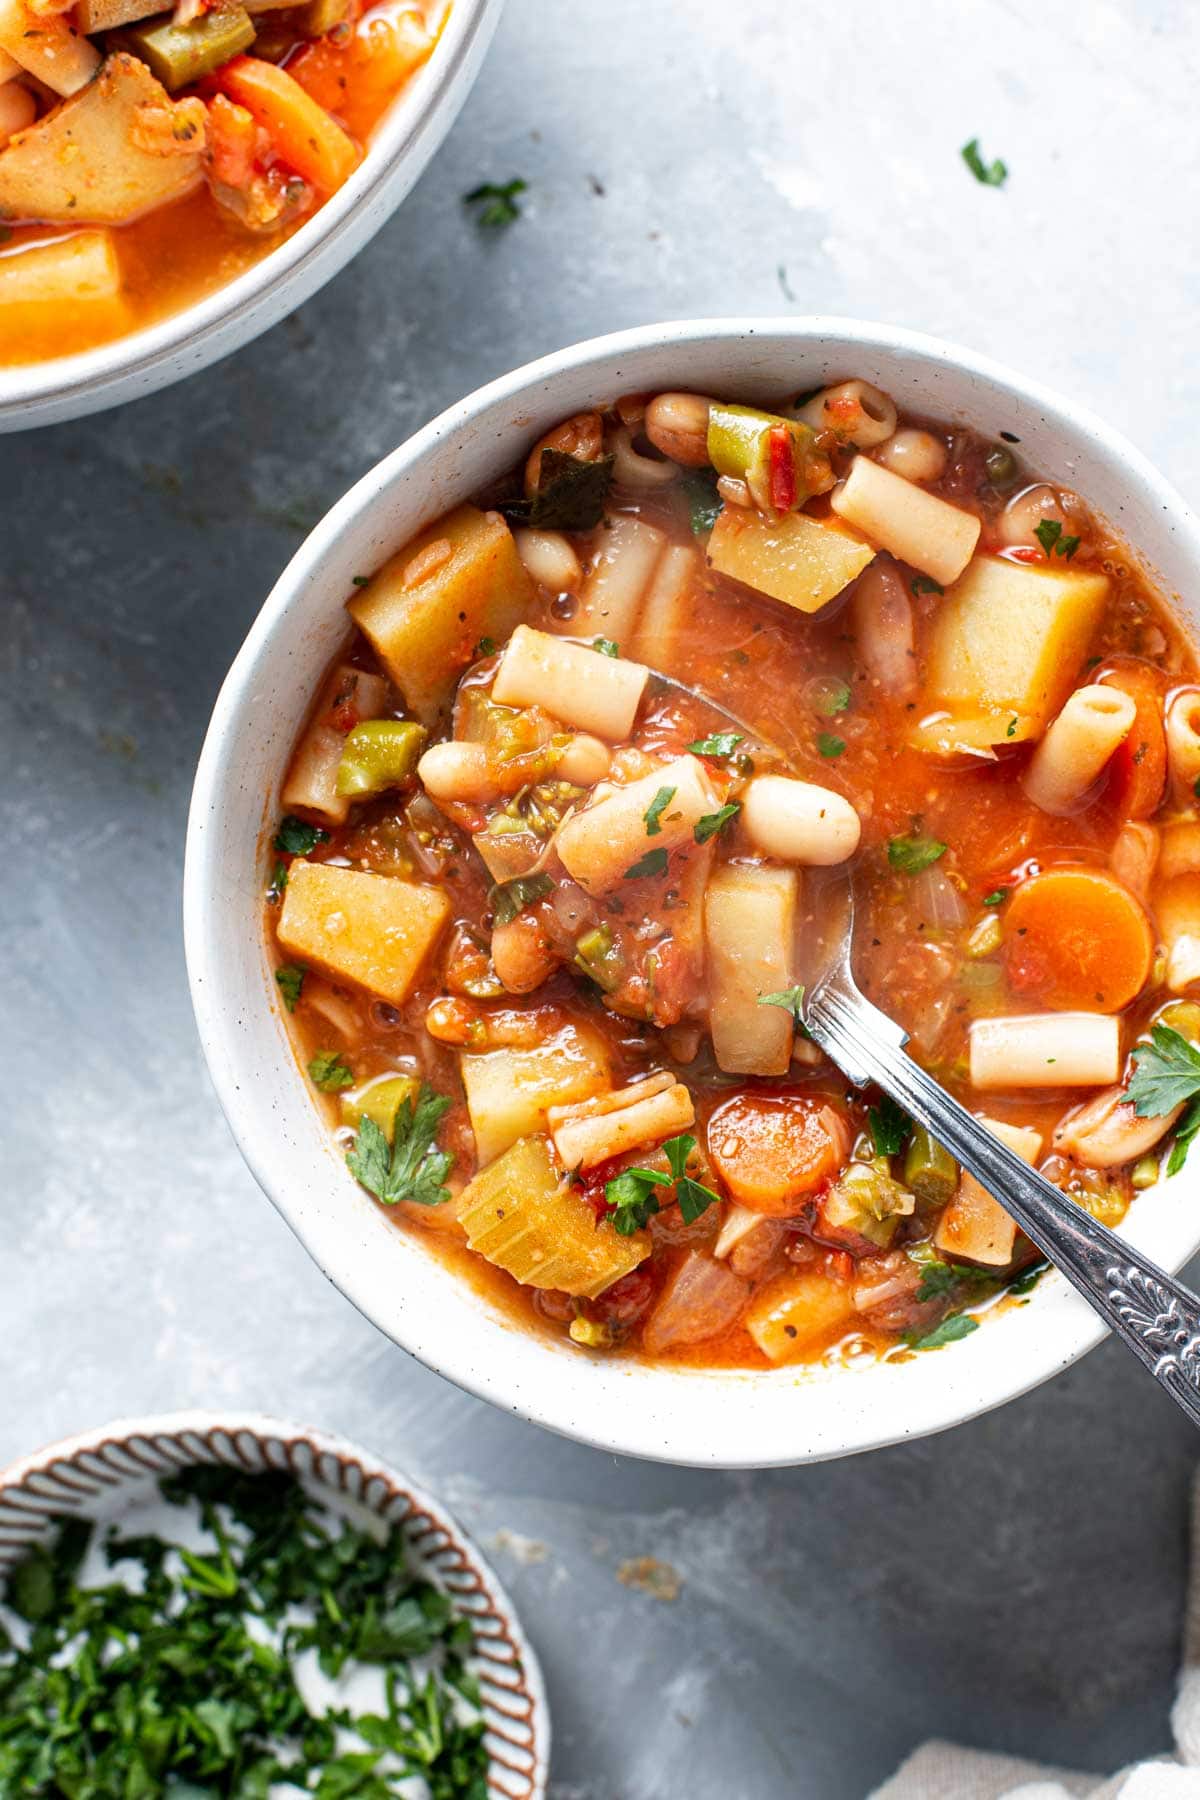 A close-up image of a bowl of minestrone with a spoon placed in the middle.